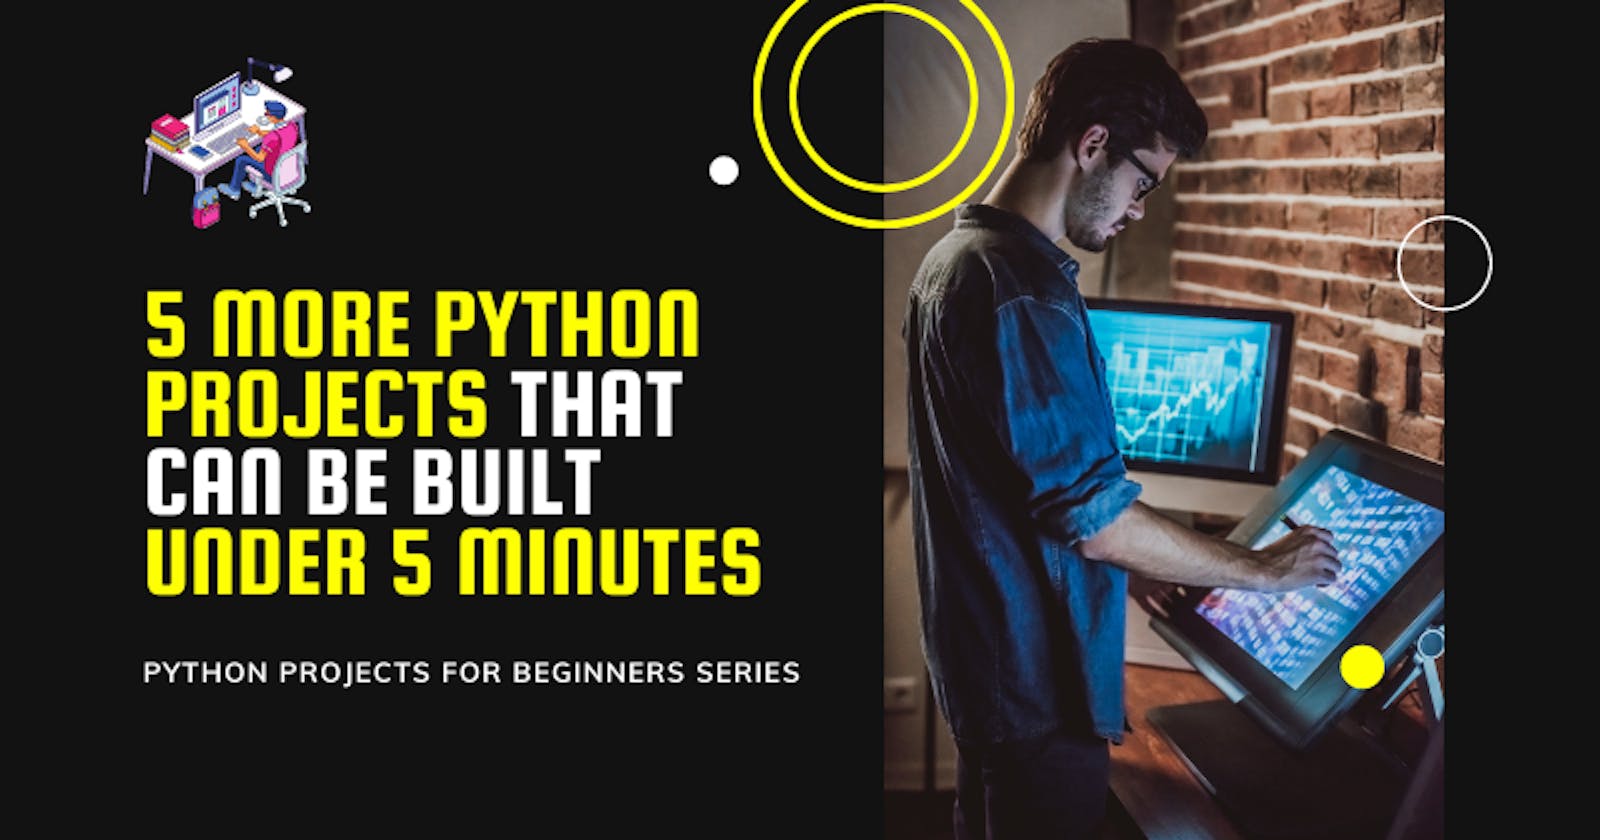 5 More Python Projects That Can Be Built in Under 5 Minutes